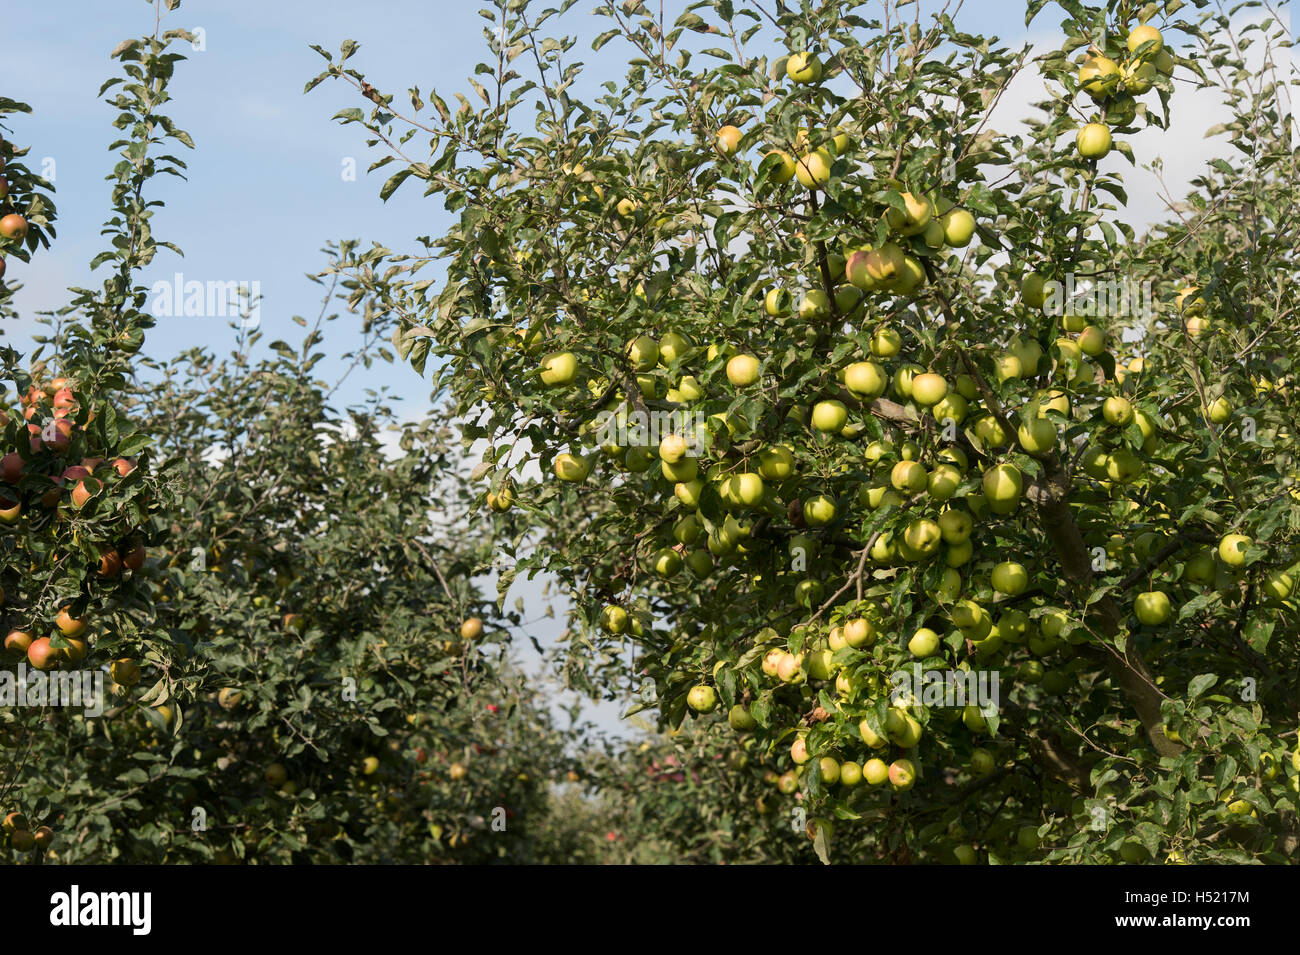 https://c8.alamy.com/comp/H5217M/malus-domestica-golden-delicious-apples-on-a-tree-in-an-orchard-H5217M.jpg